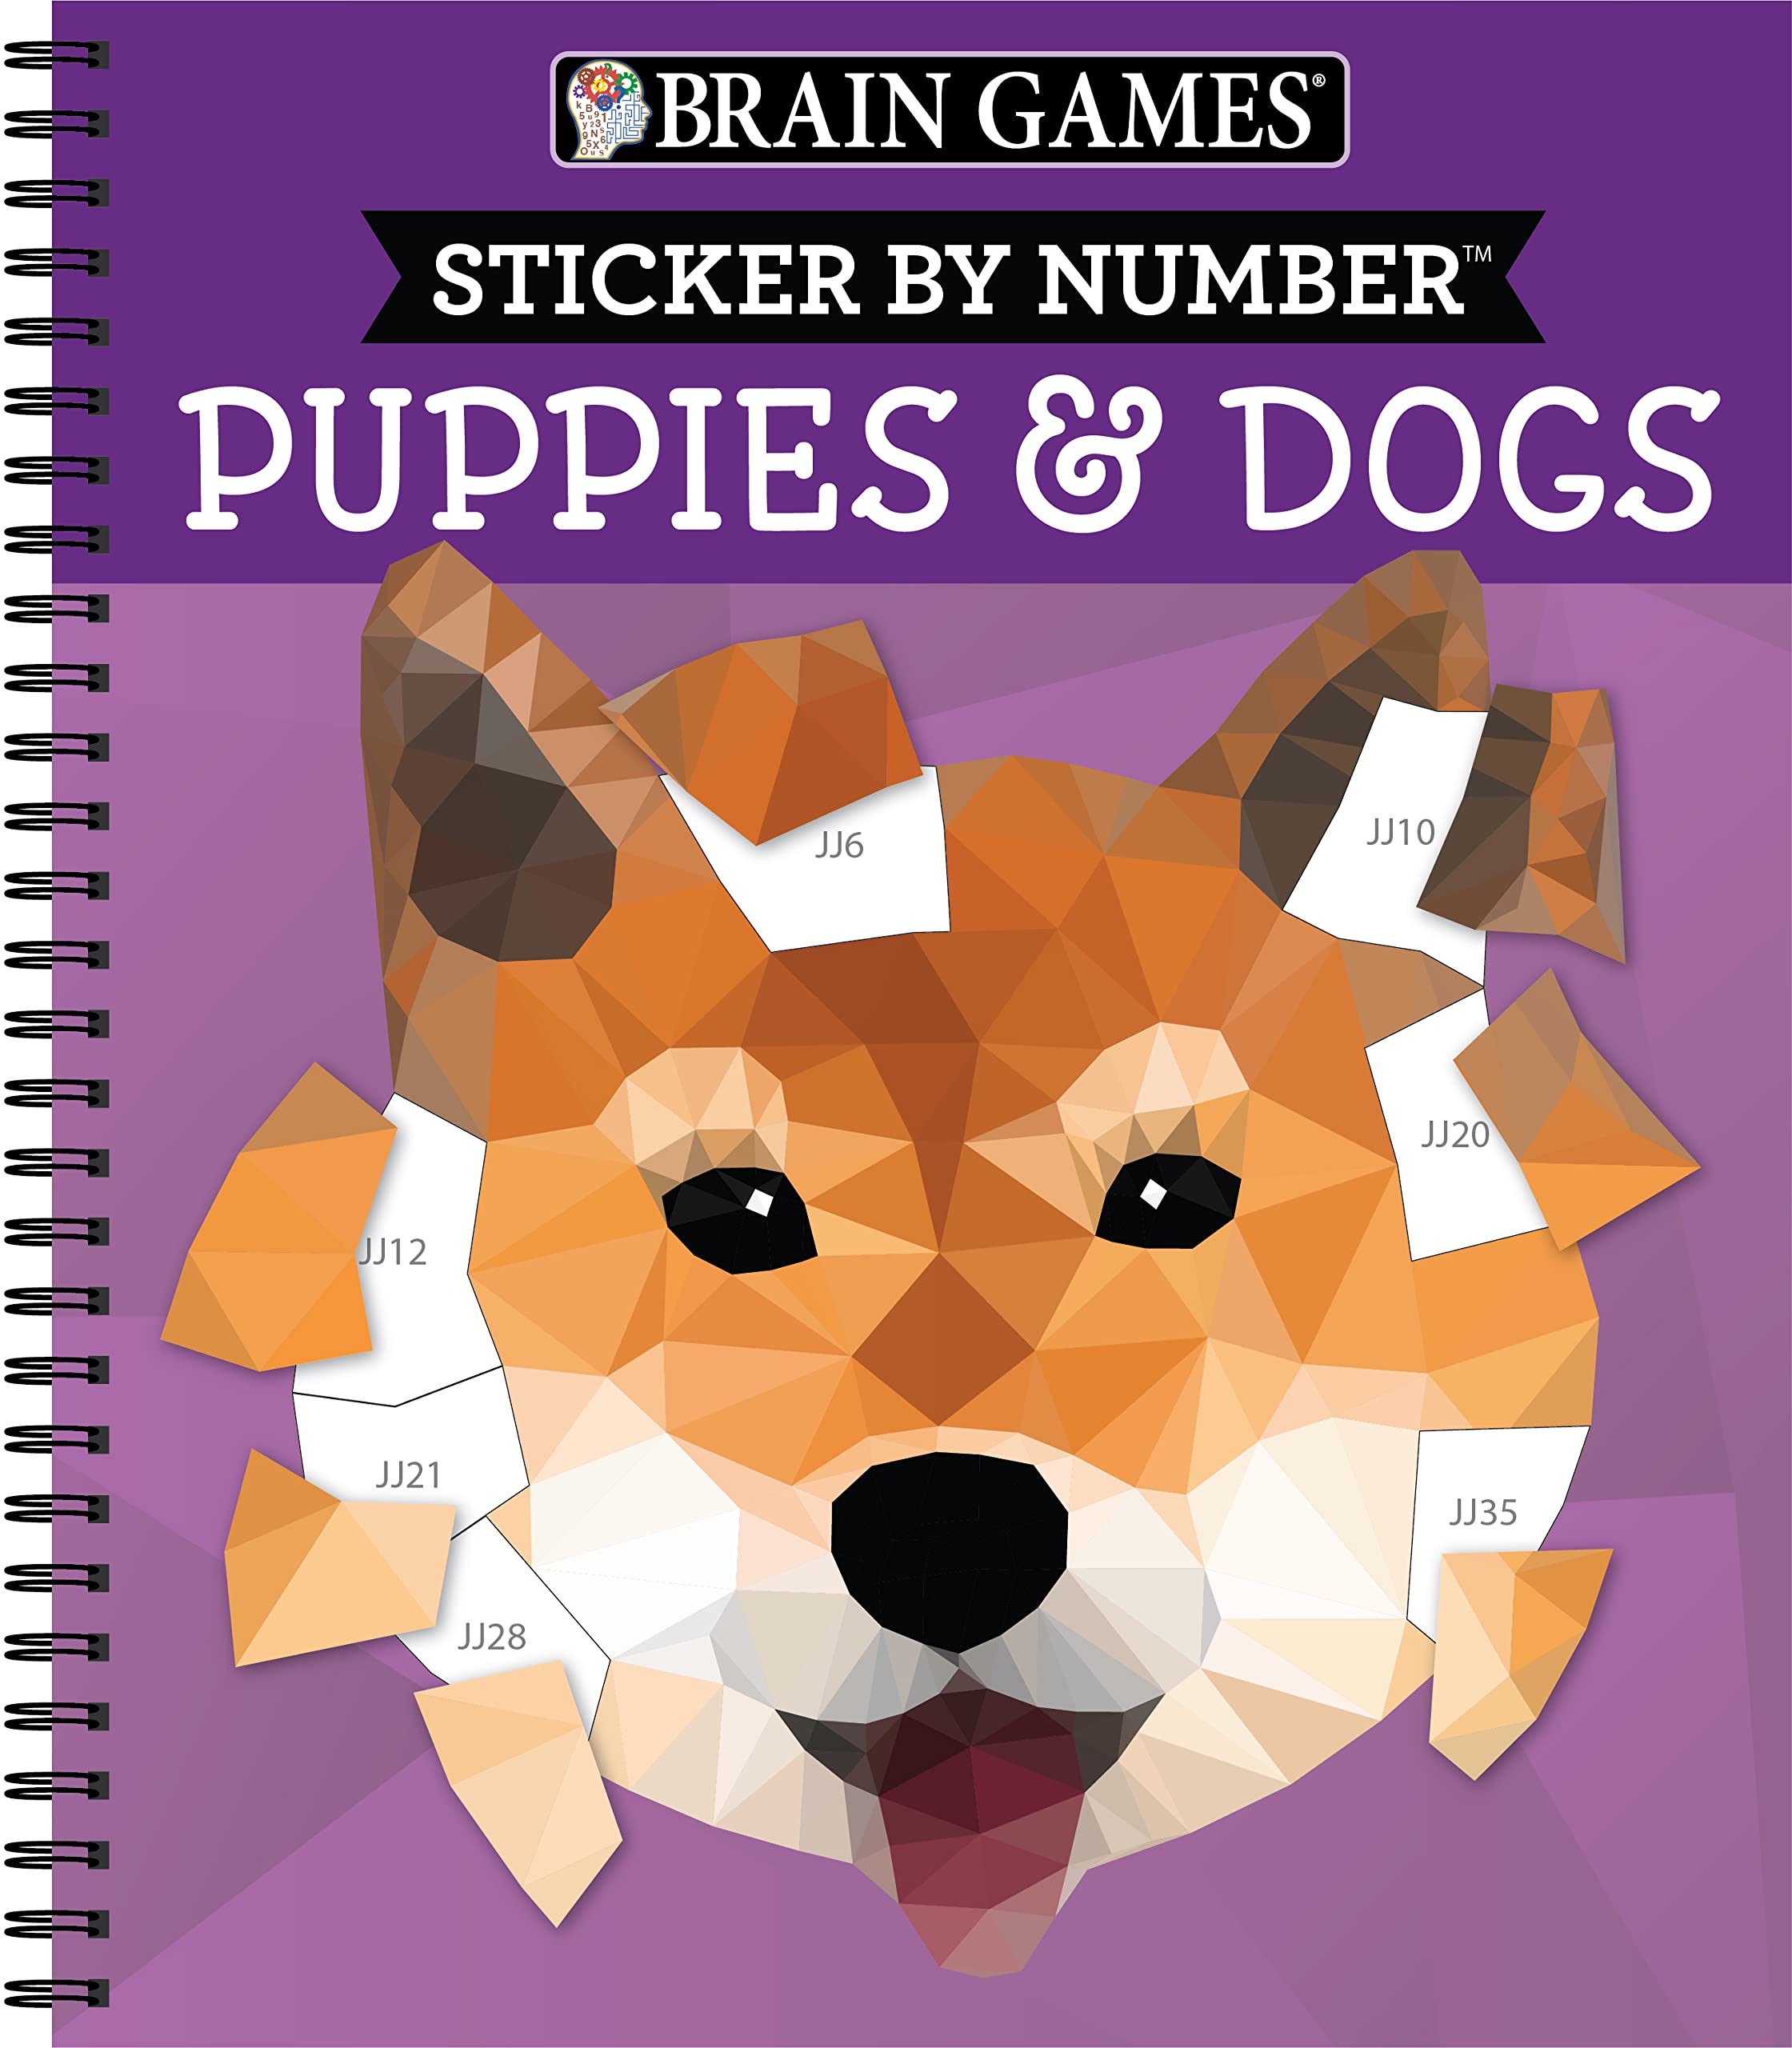 Brain Games - Sticker by Number: Puppies & Dogs - 2 Books in 1 (42 Images to Sticker) by Publications International Ltd